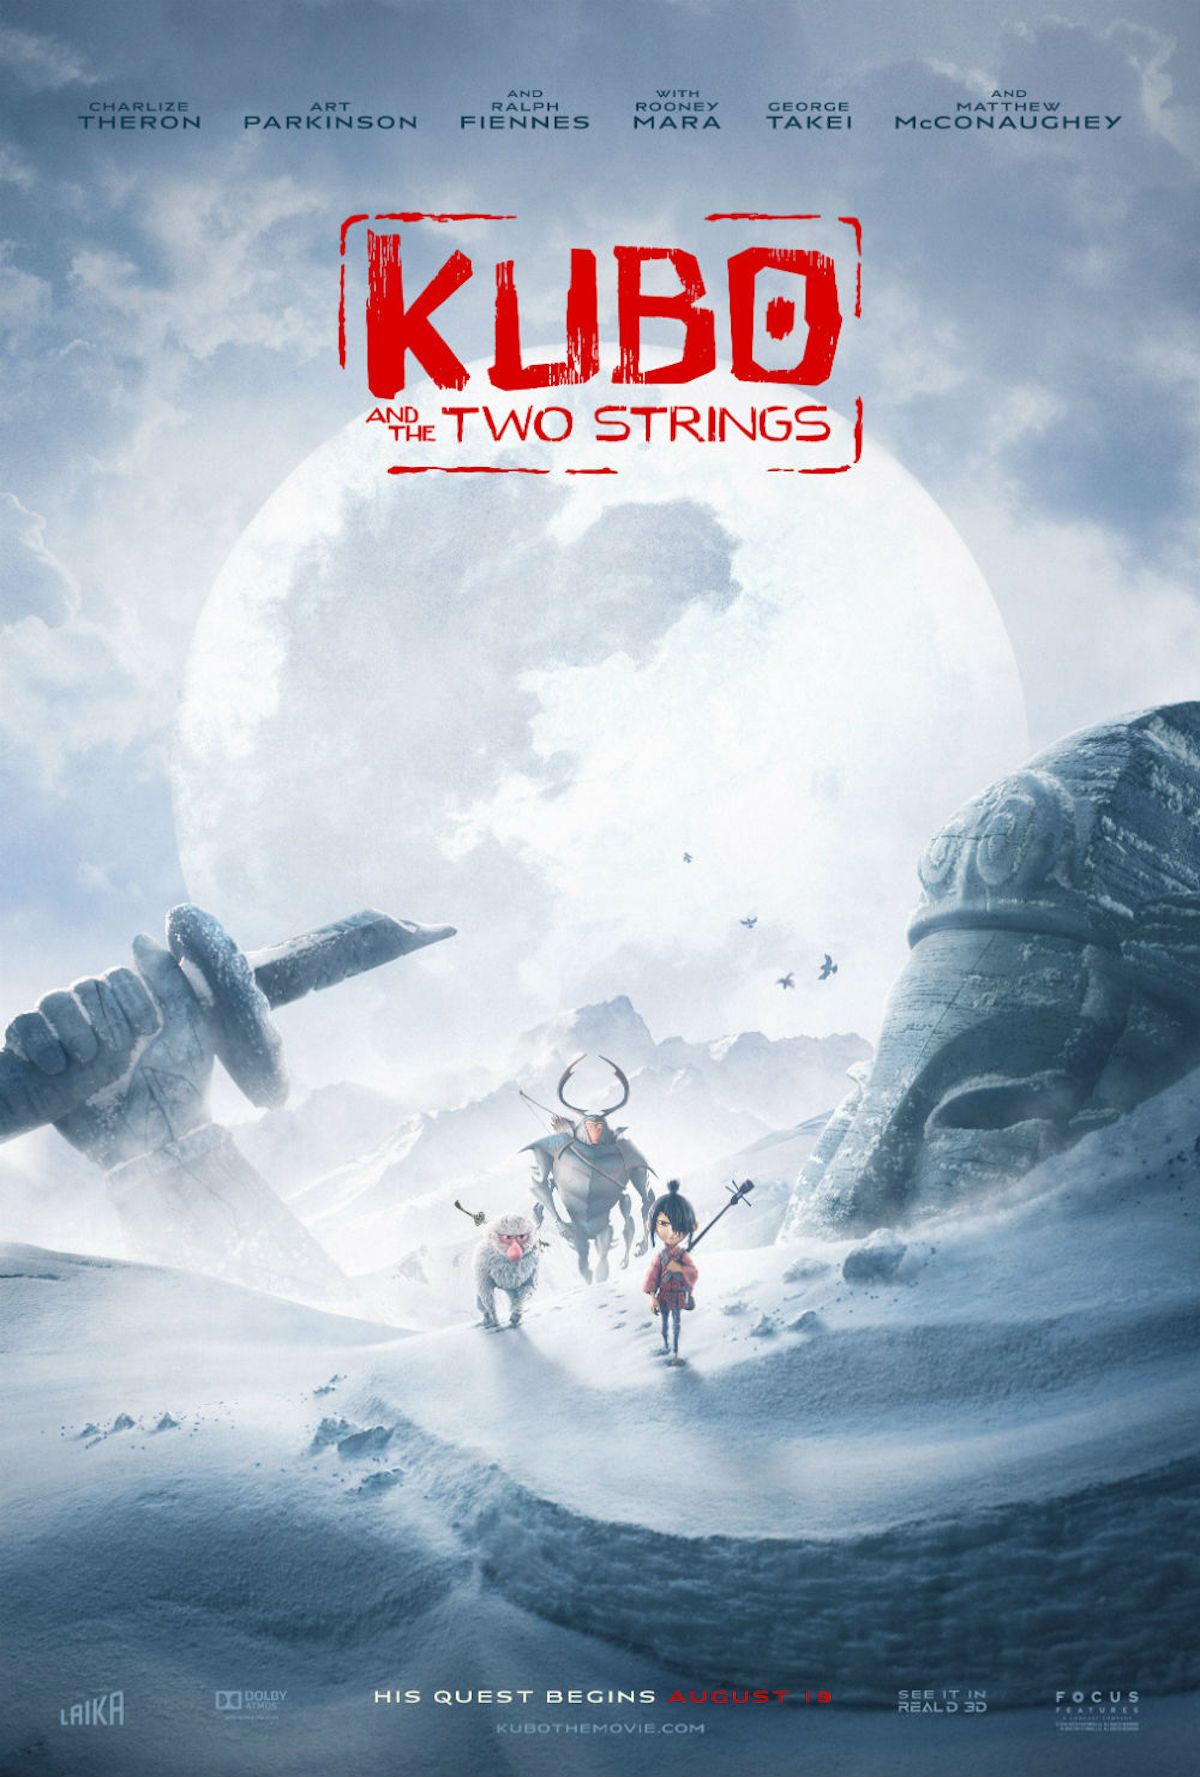 Kubo and the Two Strings Trailer #3 & Posters: Kubo’s Adventure Begins